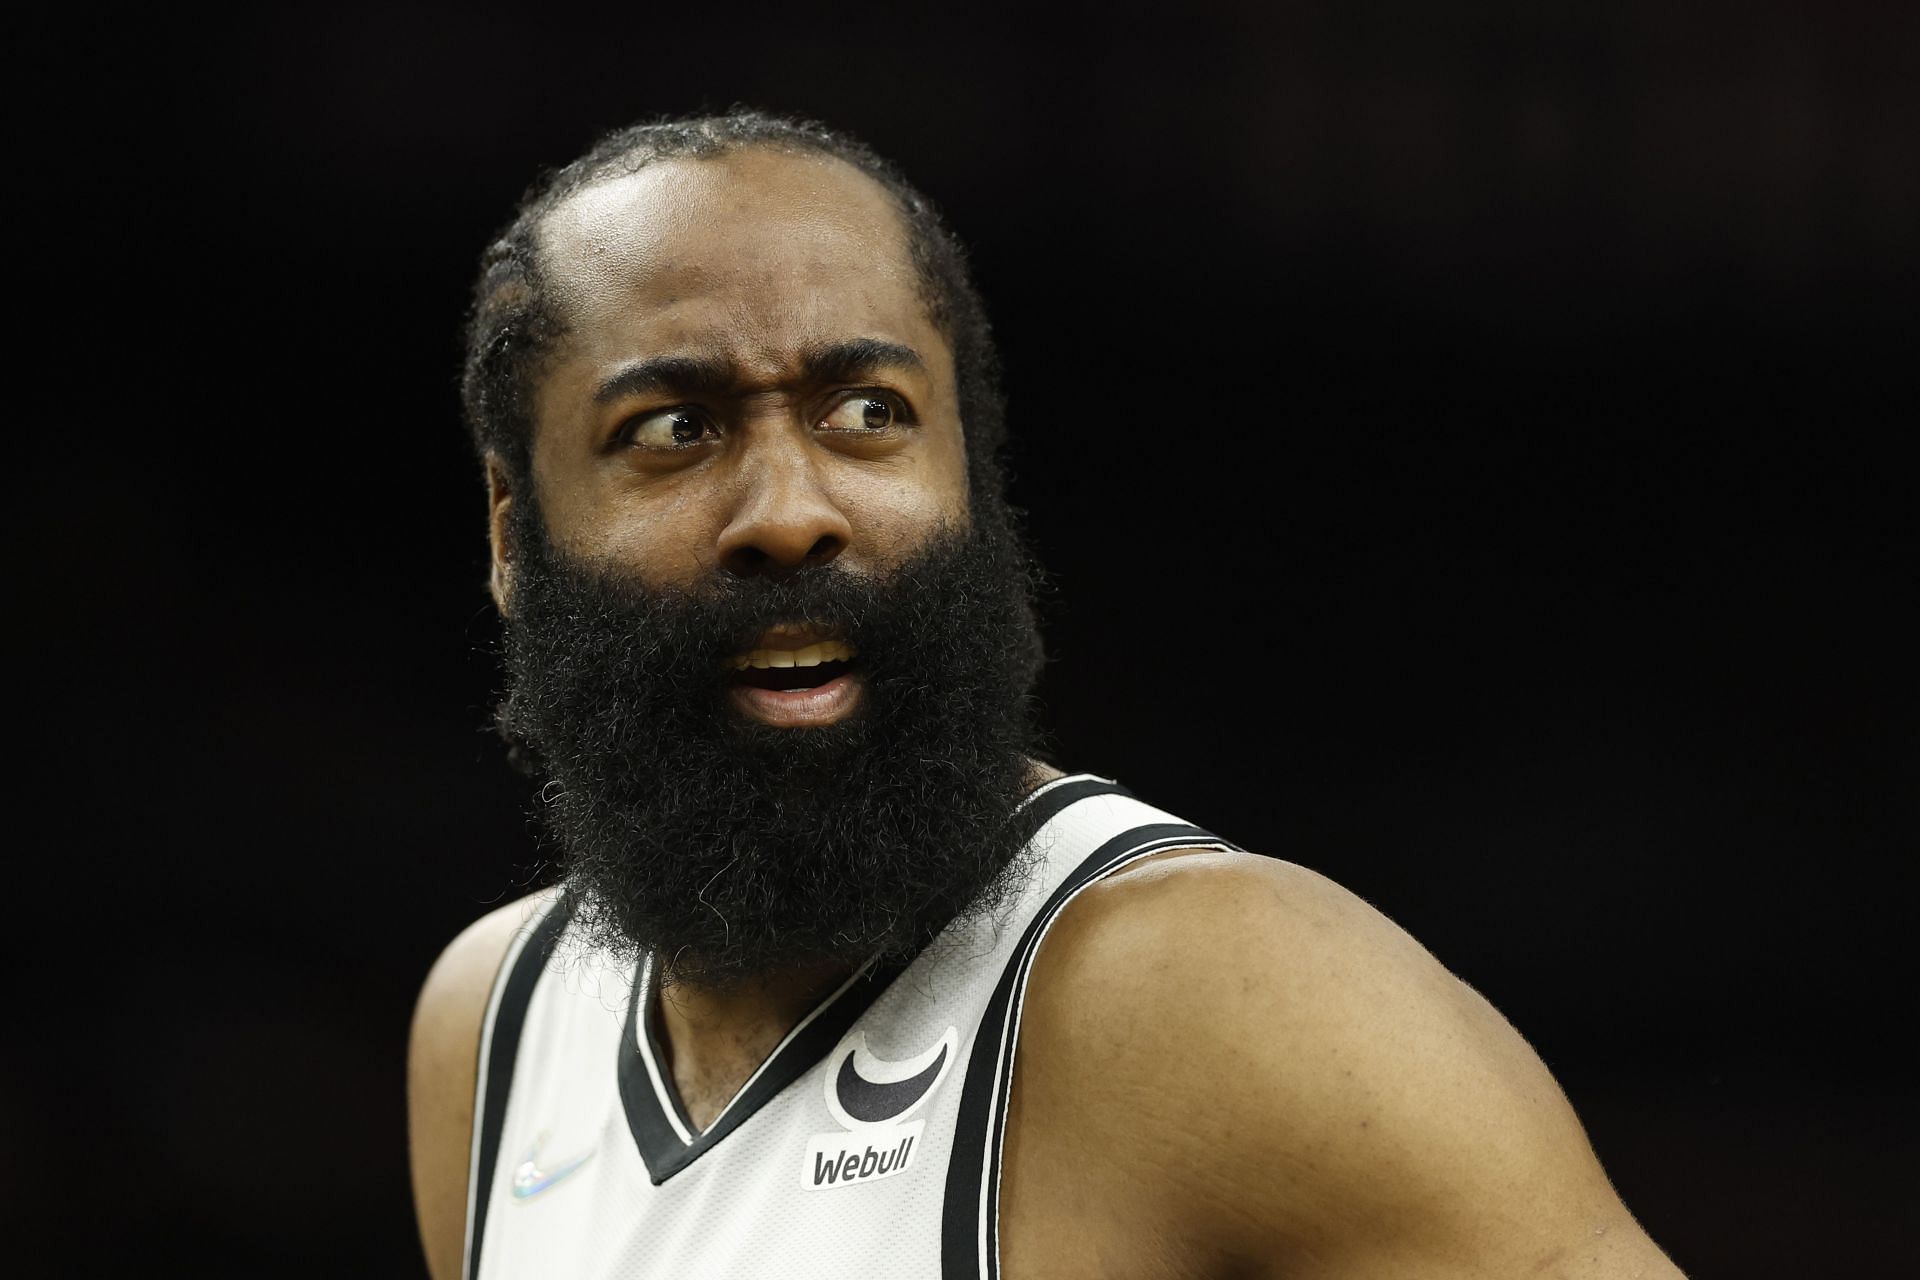 James Harden #13 of the Brooklyn Nets during the first half of the NBA game at Footprint Center on February 01, 2022 in Phoenix, Arizona.